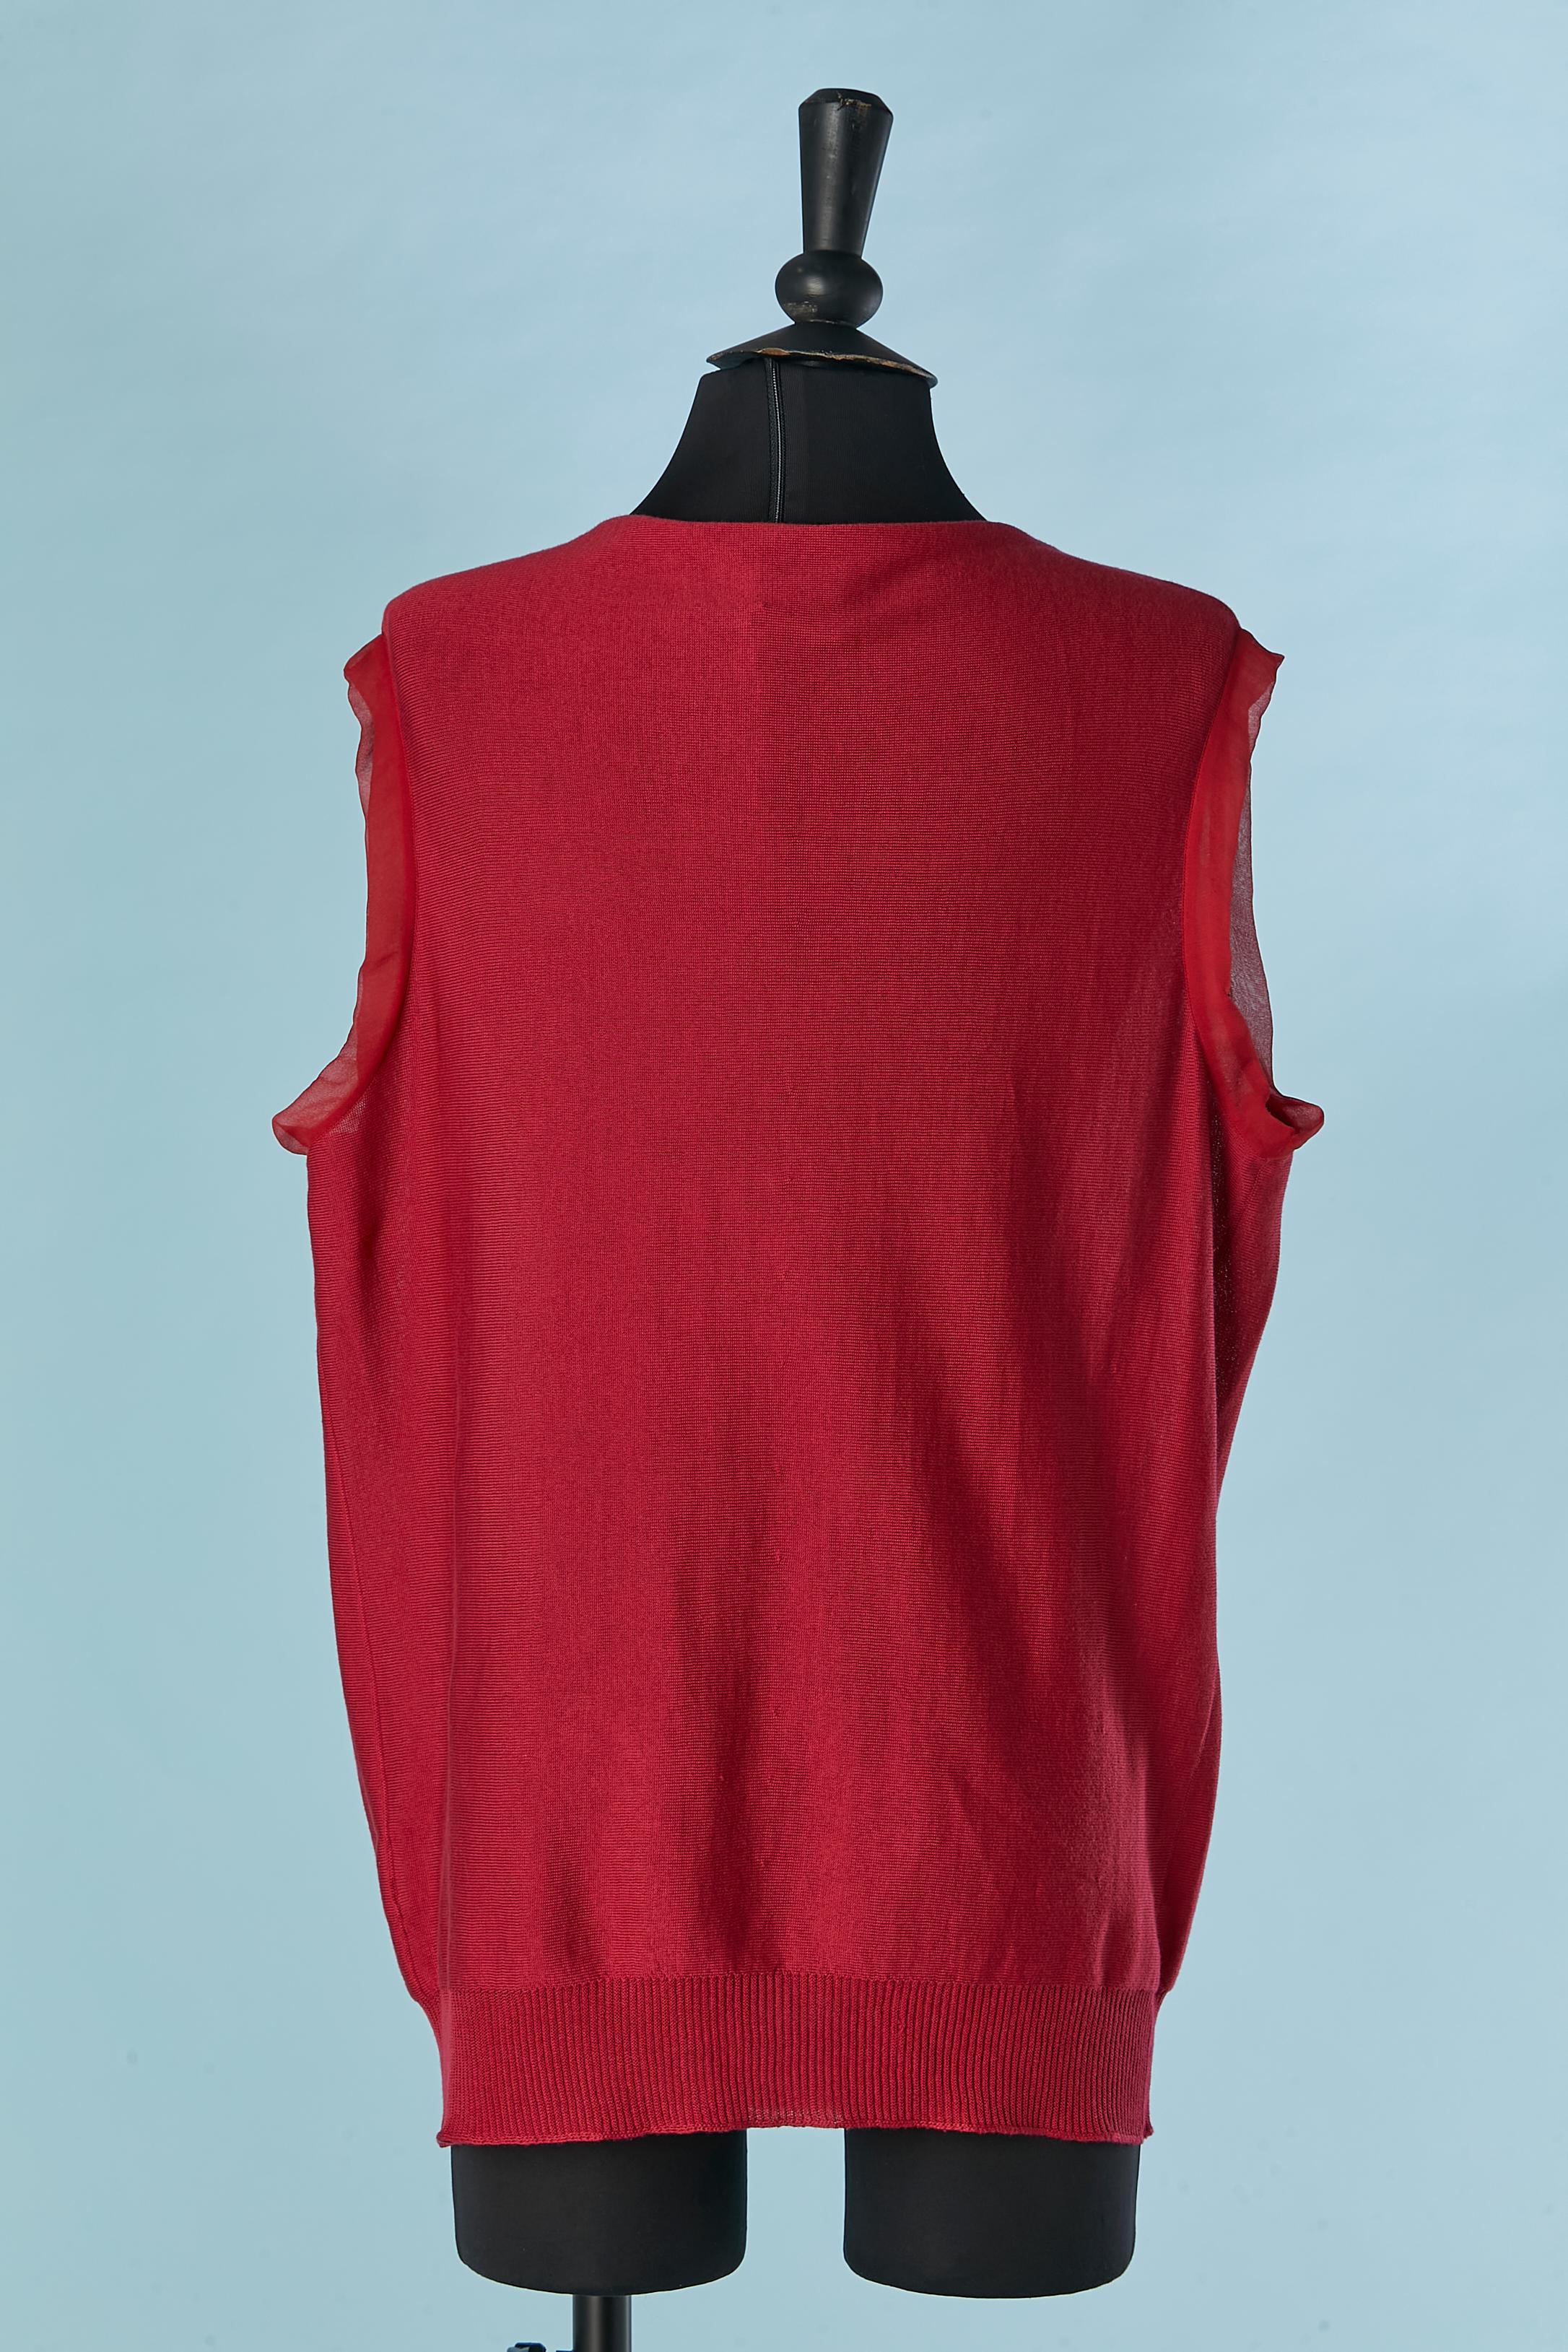 Red silk and cotton sleeveless sweater Lanvin by Alber Elbaz  For Sale 1